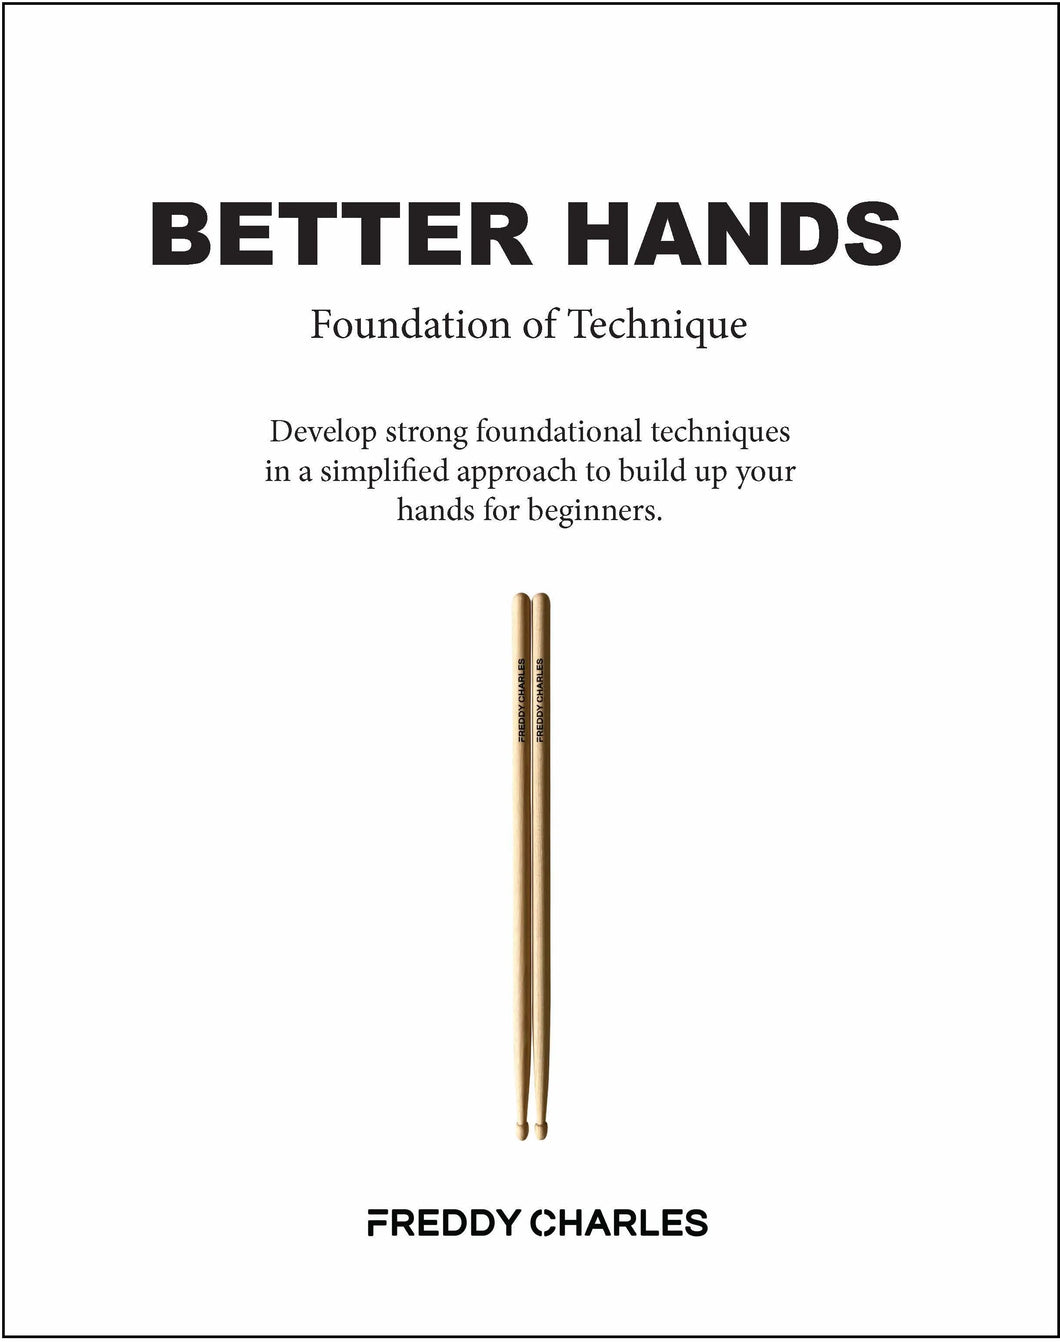 Better Hands ebook and video